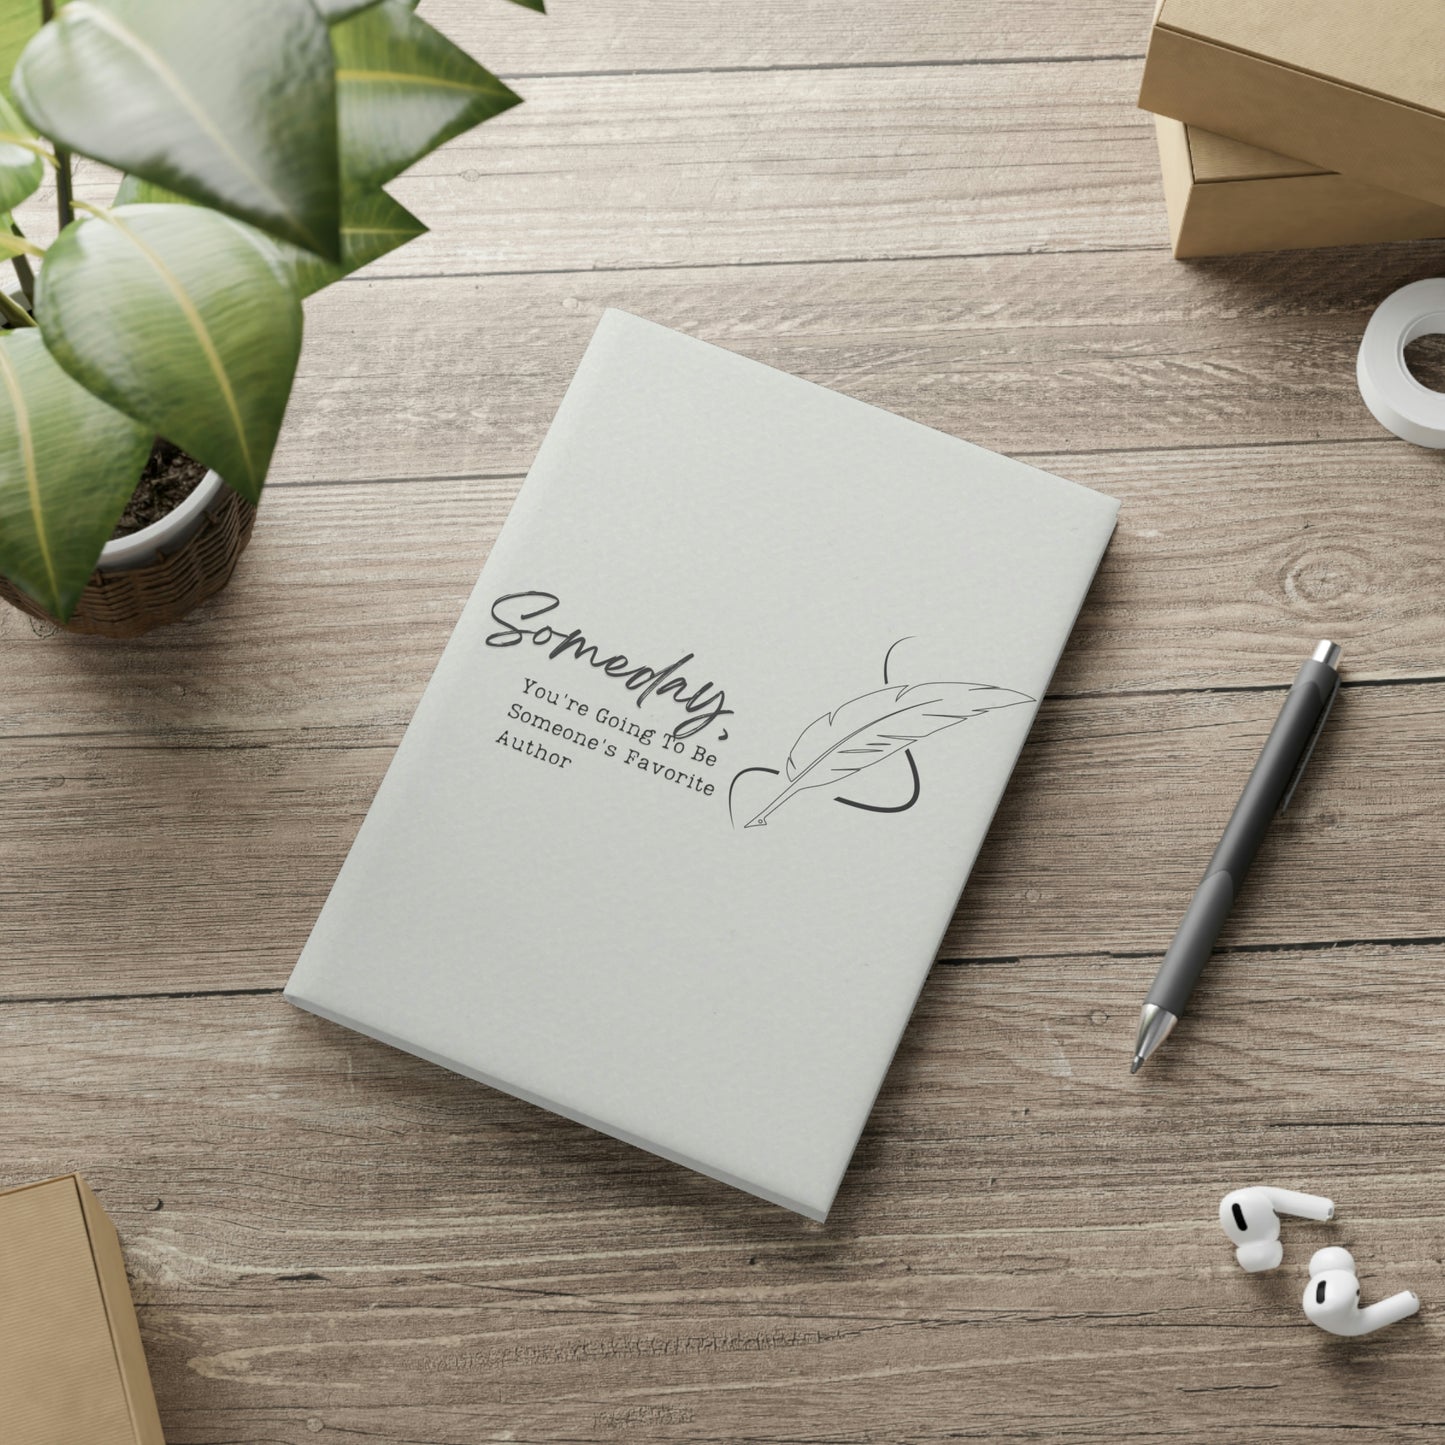 Hardcover Notebook with Puffy Covers // Someday, you're going to be someone's favorite author // Write Out Loud